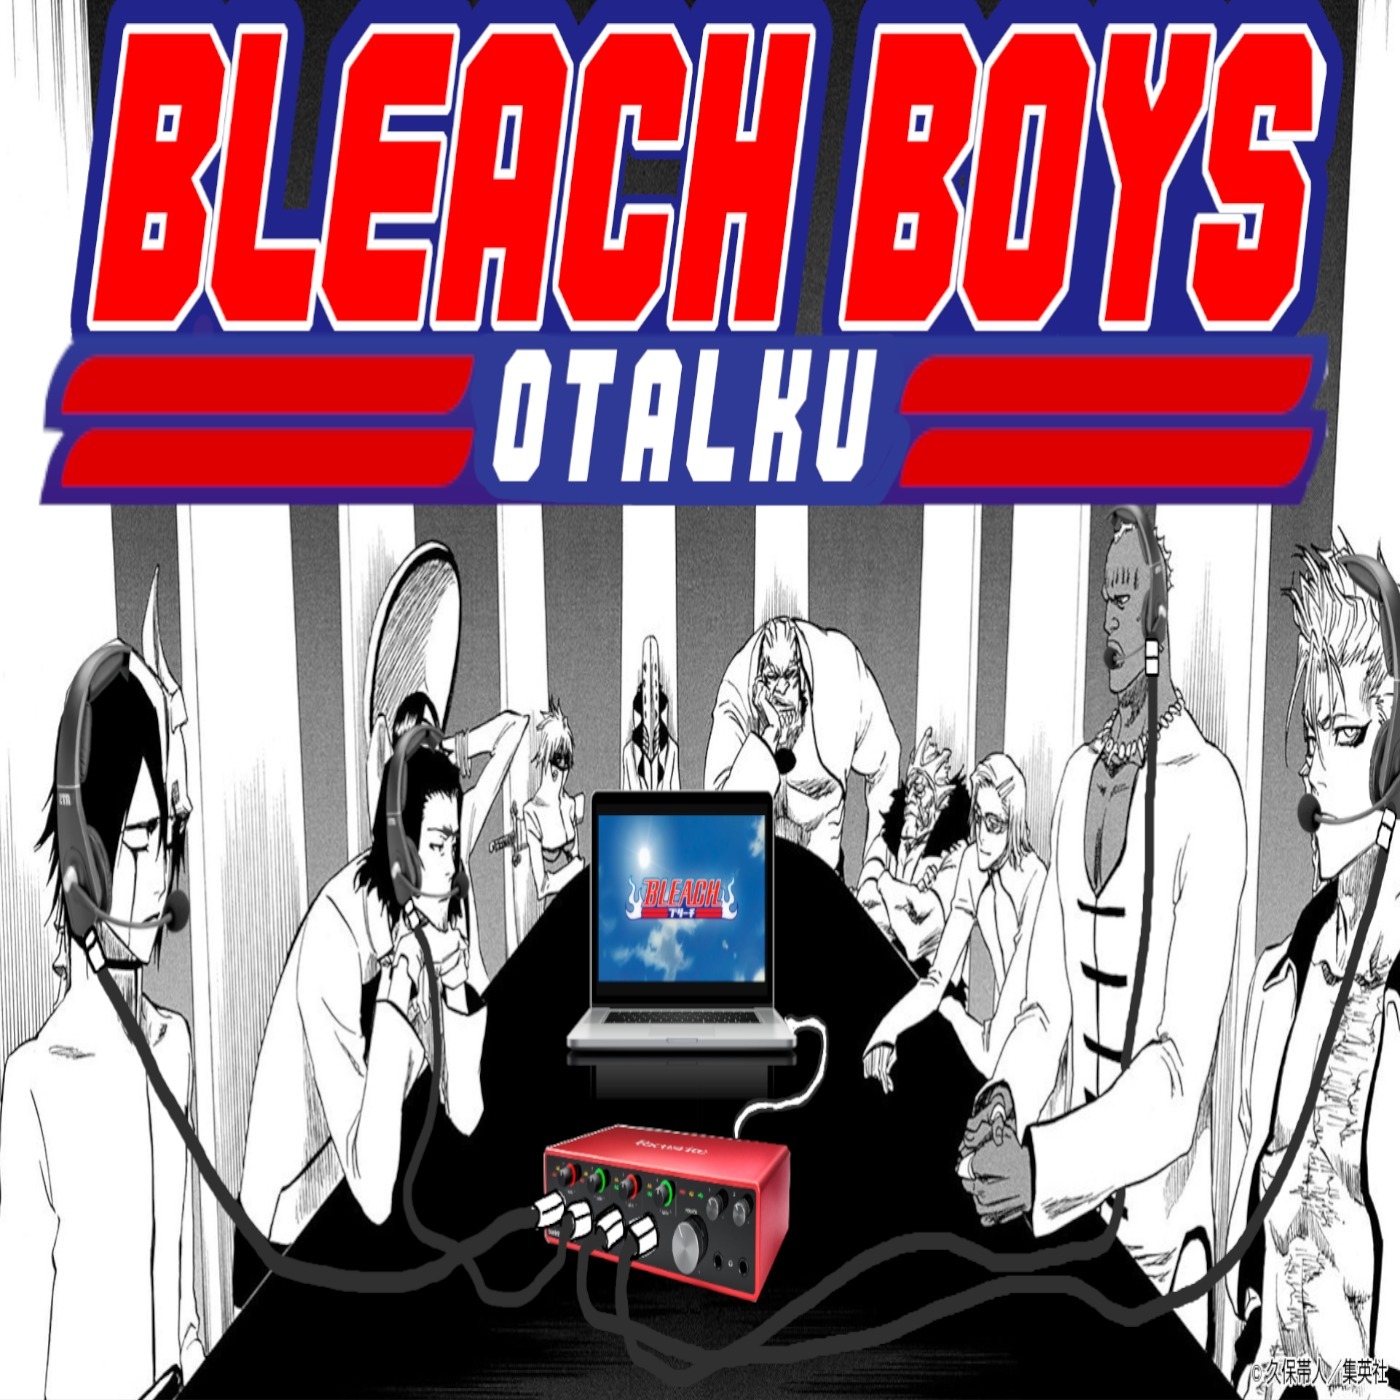 Bleach TYBW episode 22 preview hints at Ichigo's decision to bring Uryu back